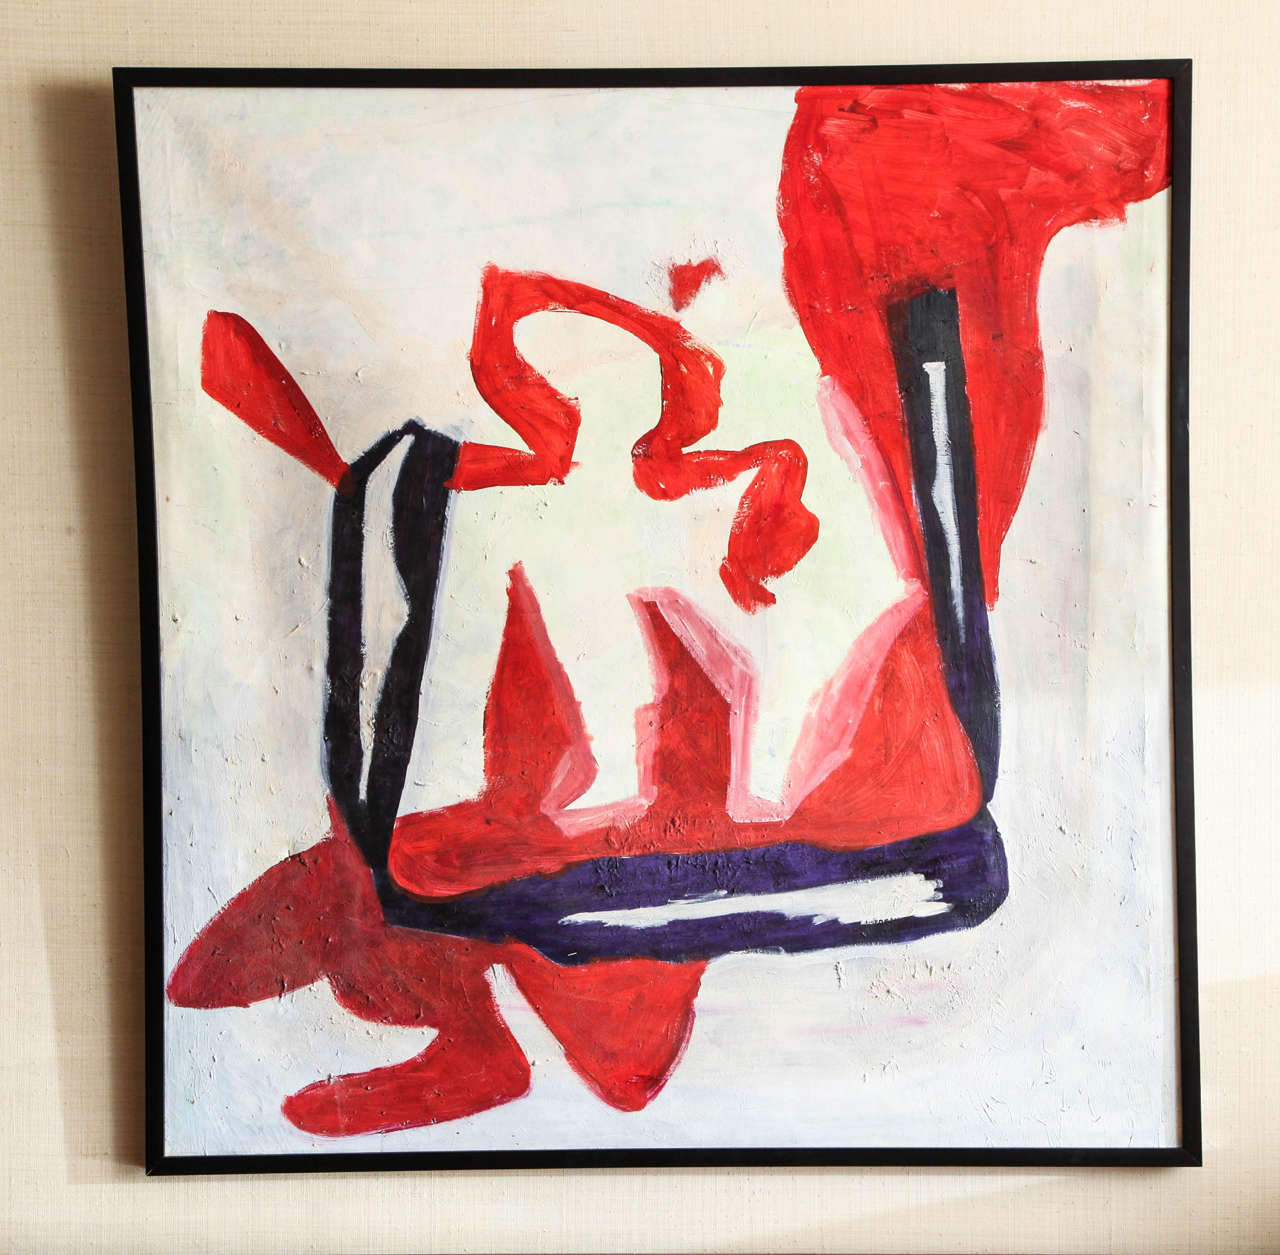 Original abstract art on canvas by Belgium artist, Guy Scohy, circa 1960.